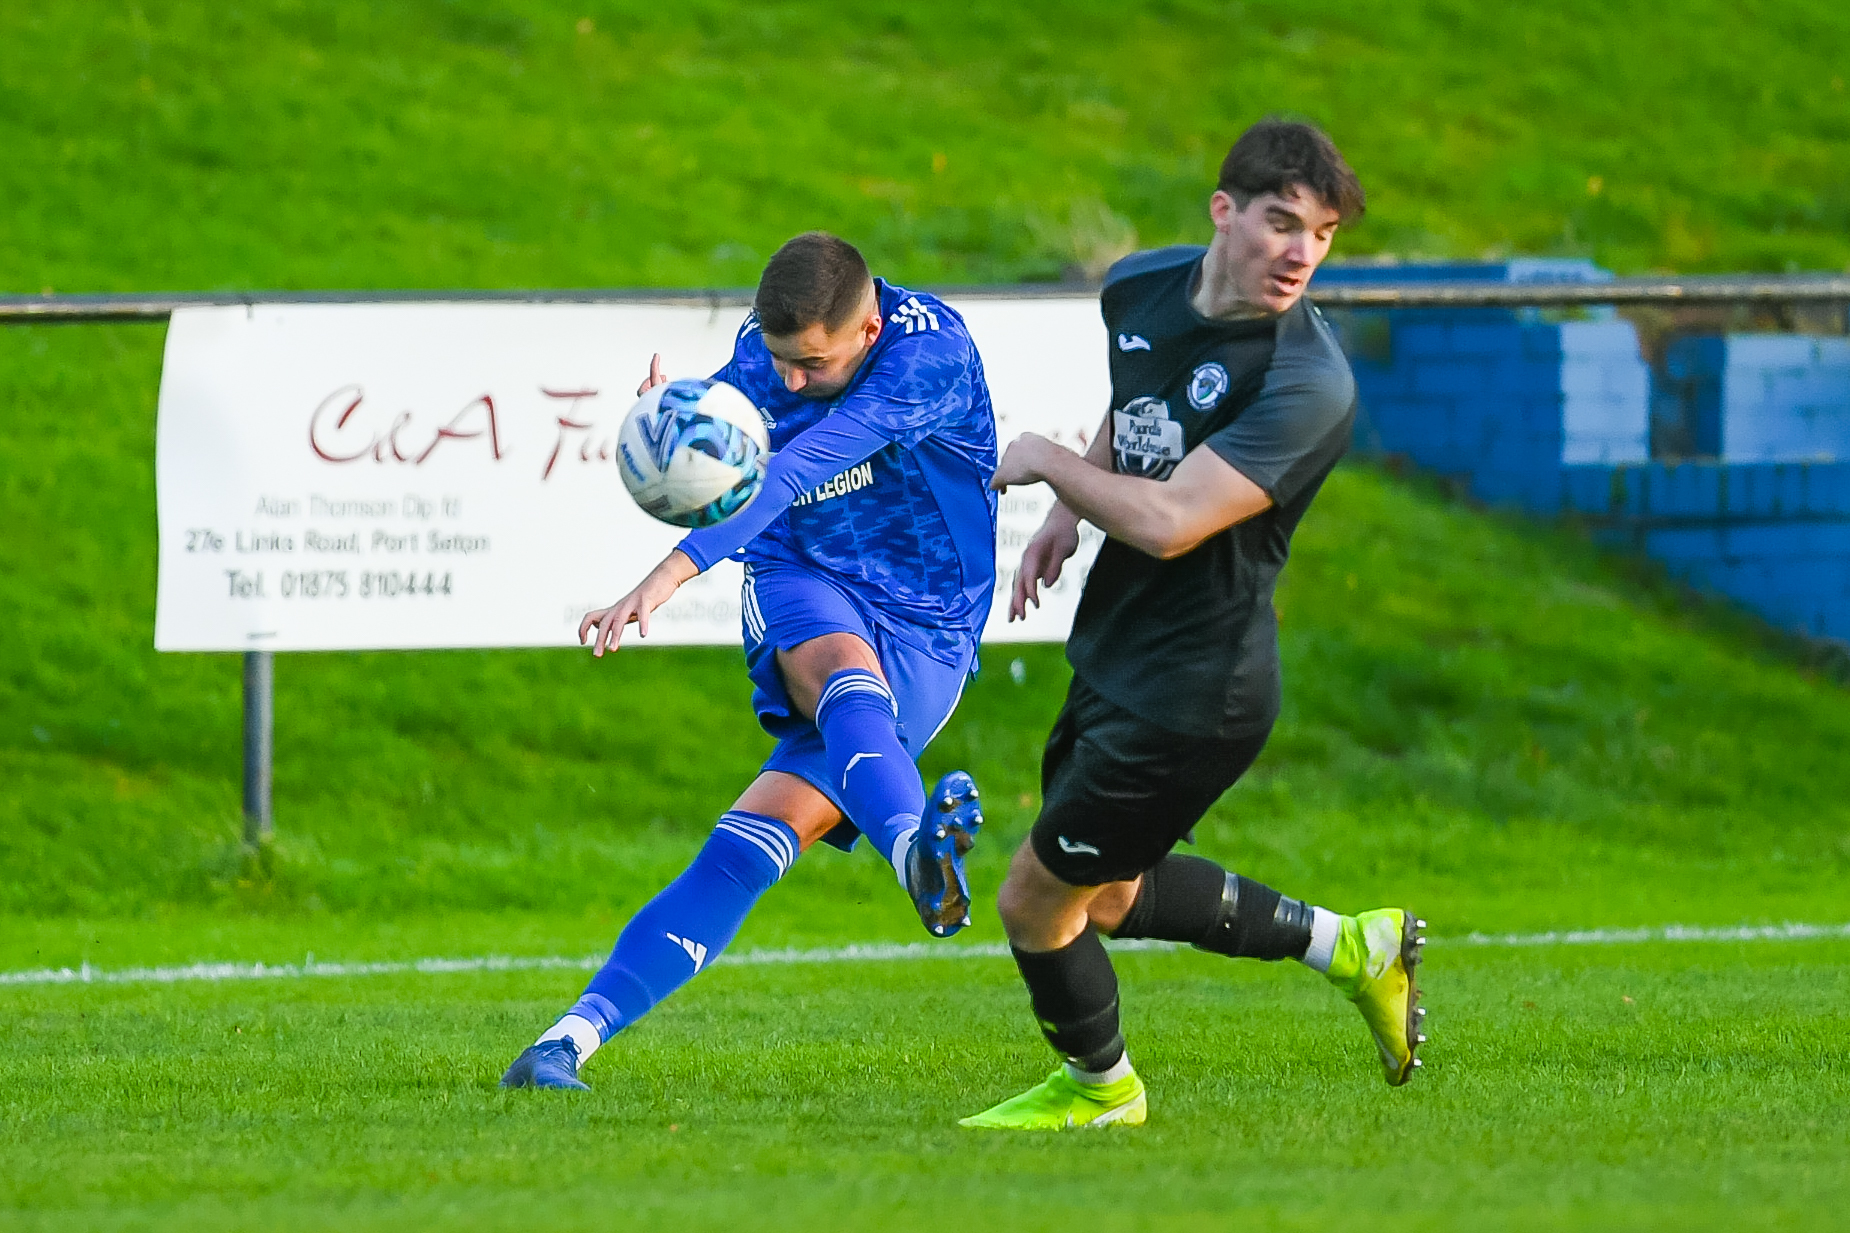 Preston Athletic (blue) will be looking for three points against Kirkcaldy & Dysart this weekend. Image: Gordon Bell.